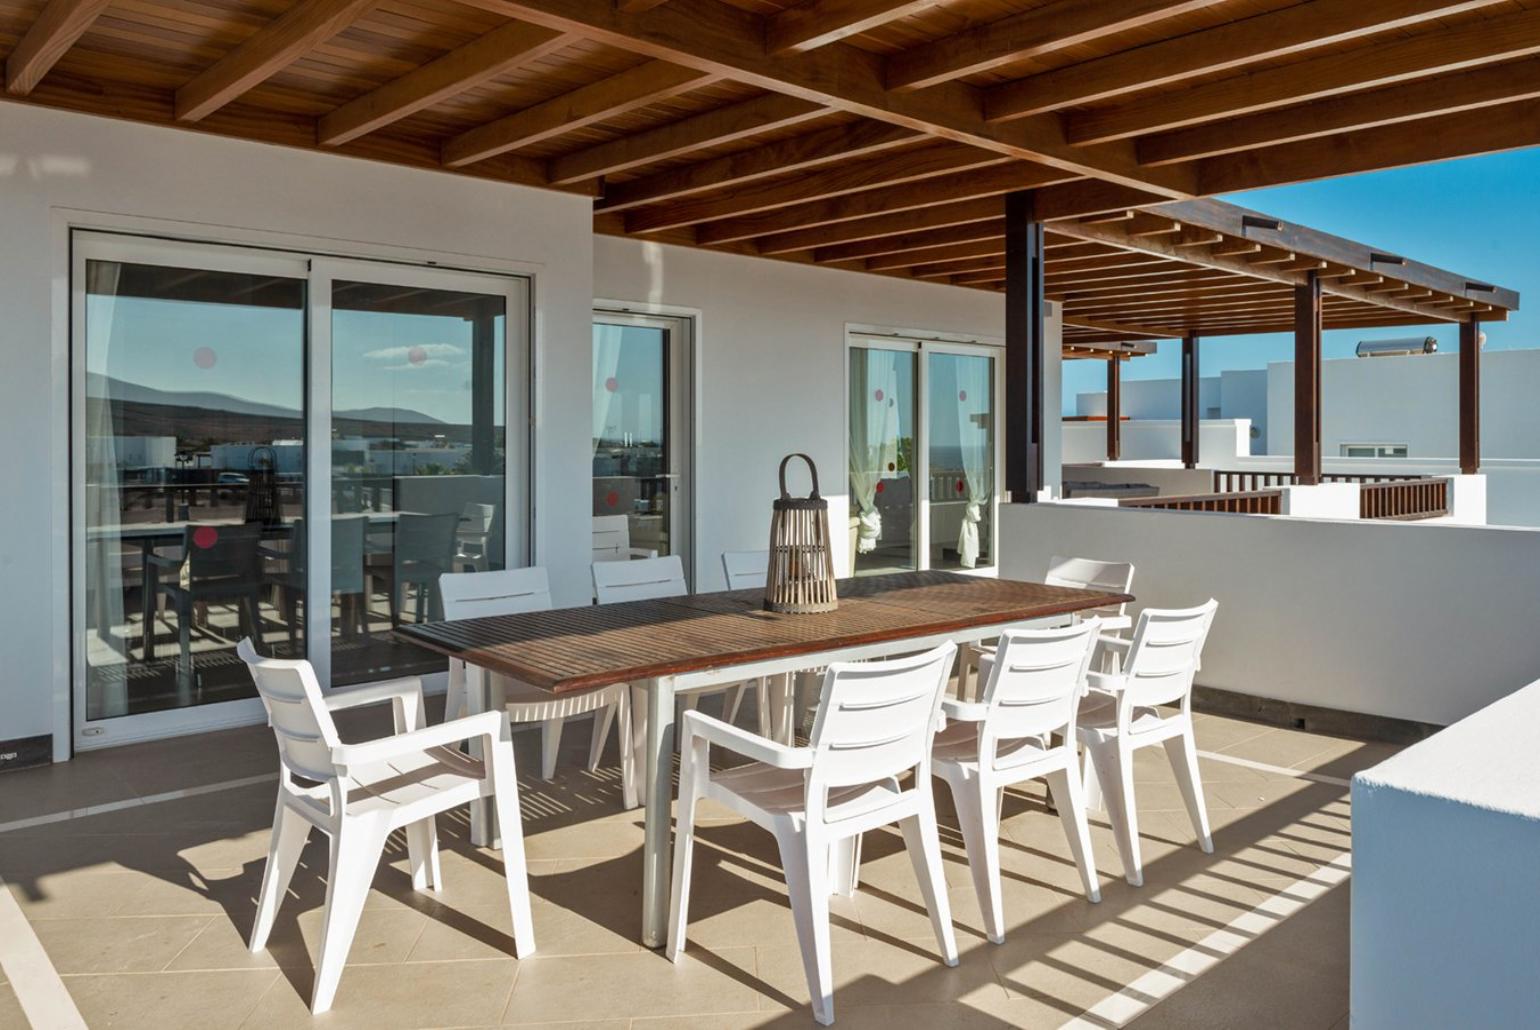 Sheltered terrace with dining area and beautiful views